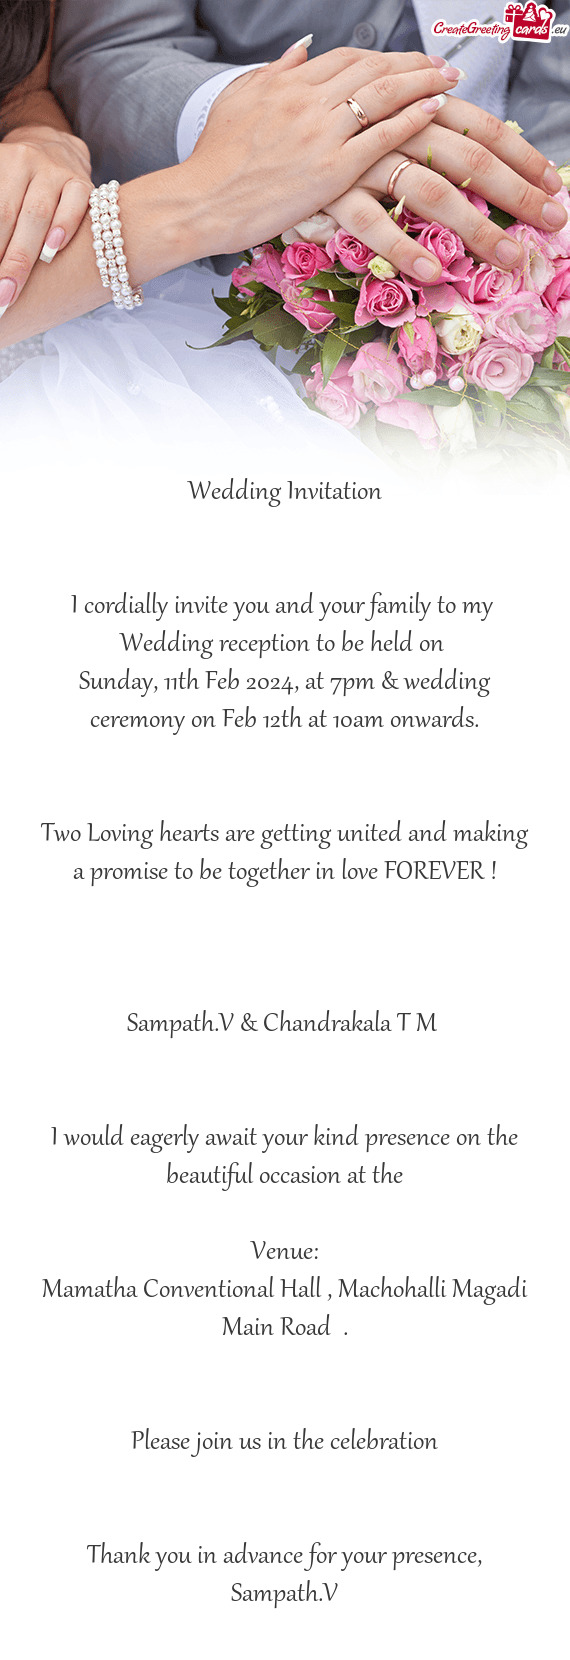 At 7pm & wedding ceremony on Feb 12th at 10am onwards